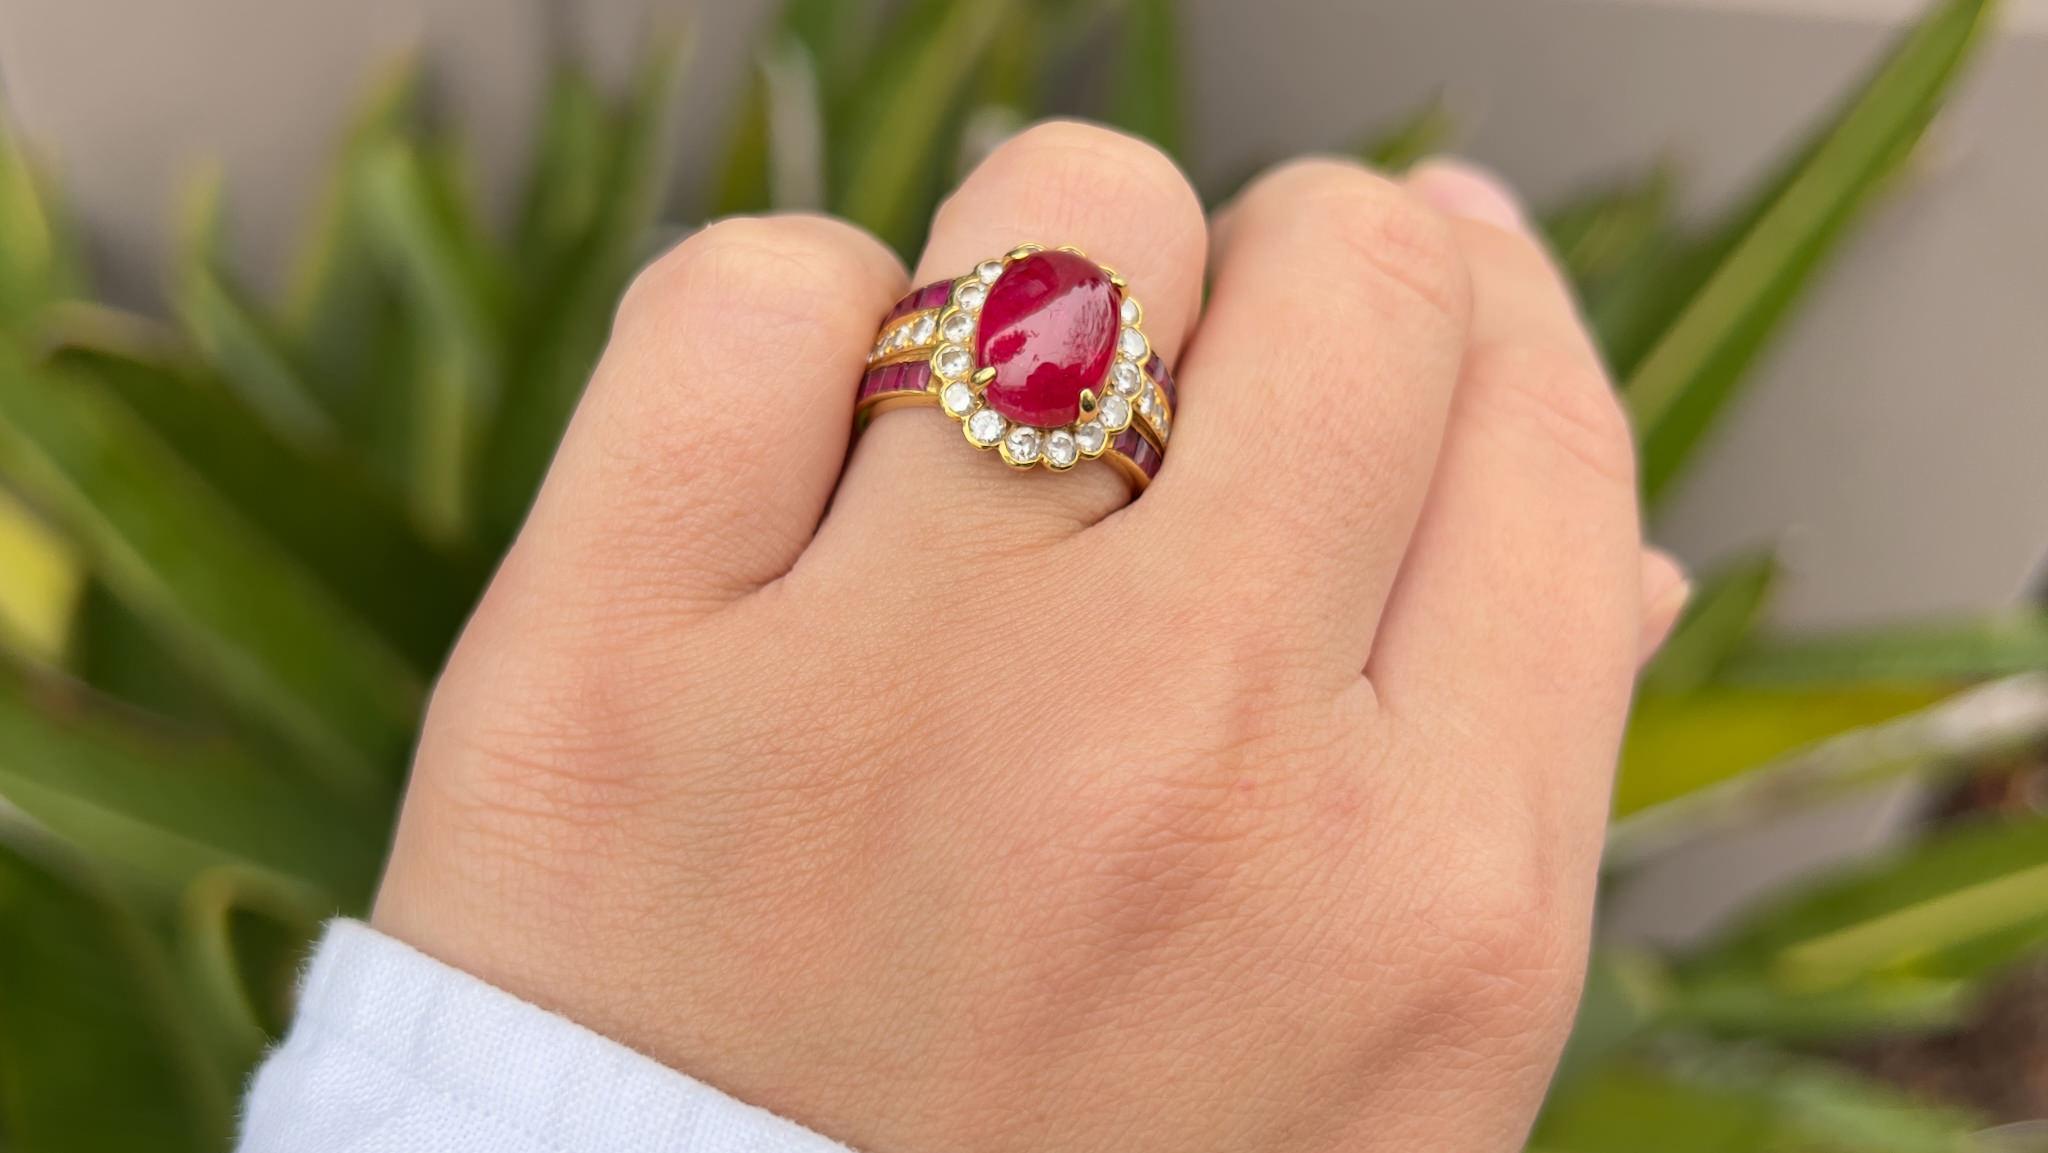 Cabochon 4.40 Carat Red Spinel Ring With Diamonds And Rubies 18K Yellow Gold In Excellent Condition For Sale In Carlsbad, CA